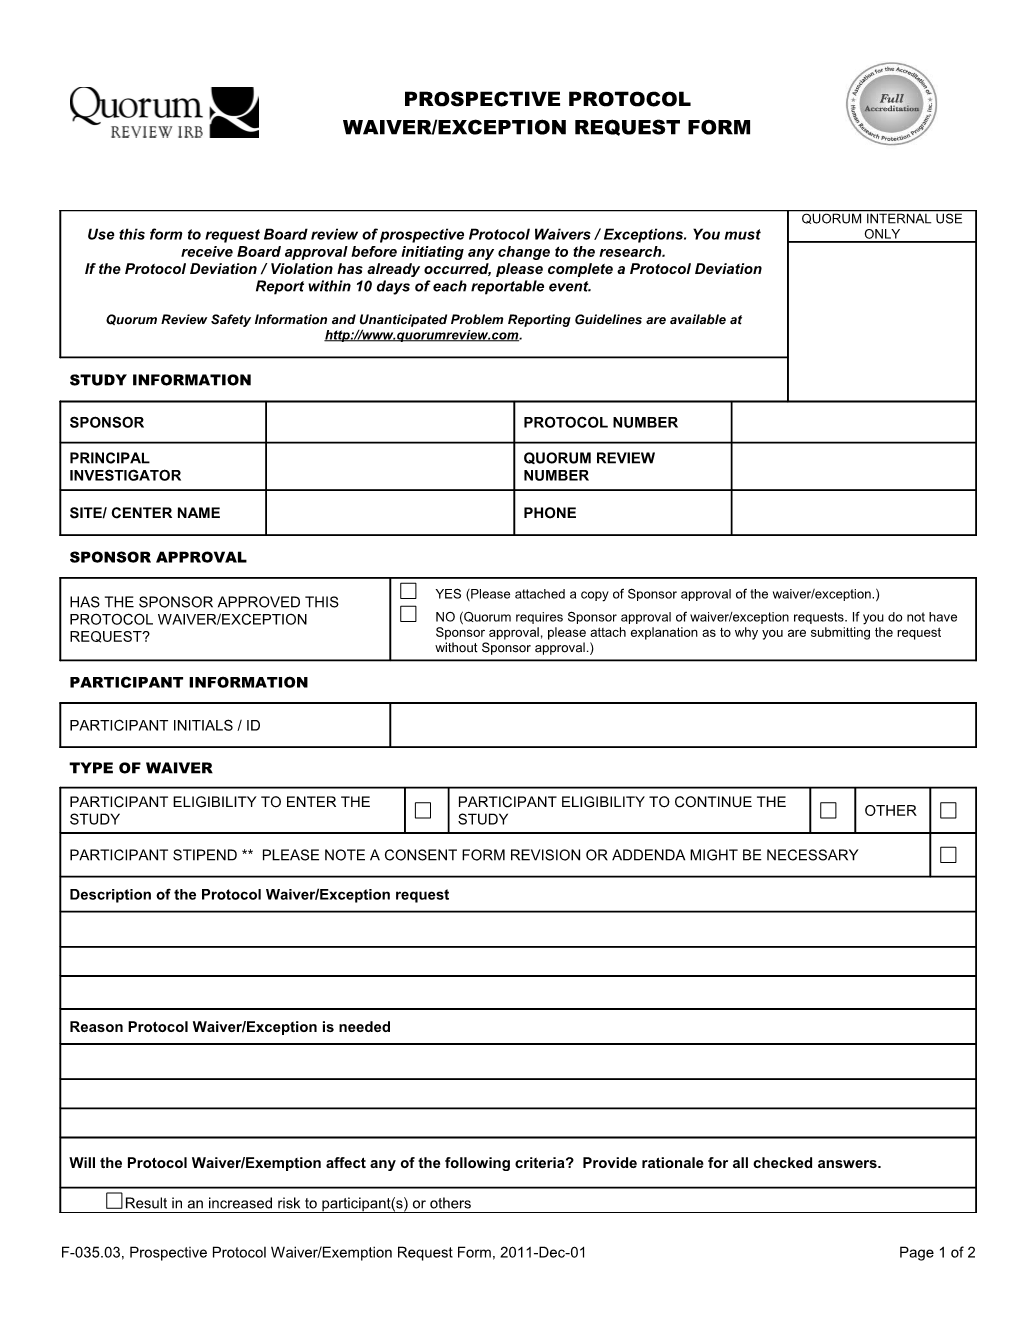 Use This Form to Requests IRB Review of Prospective Protocol Waivers / Exceptions